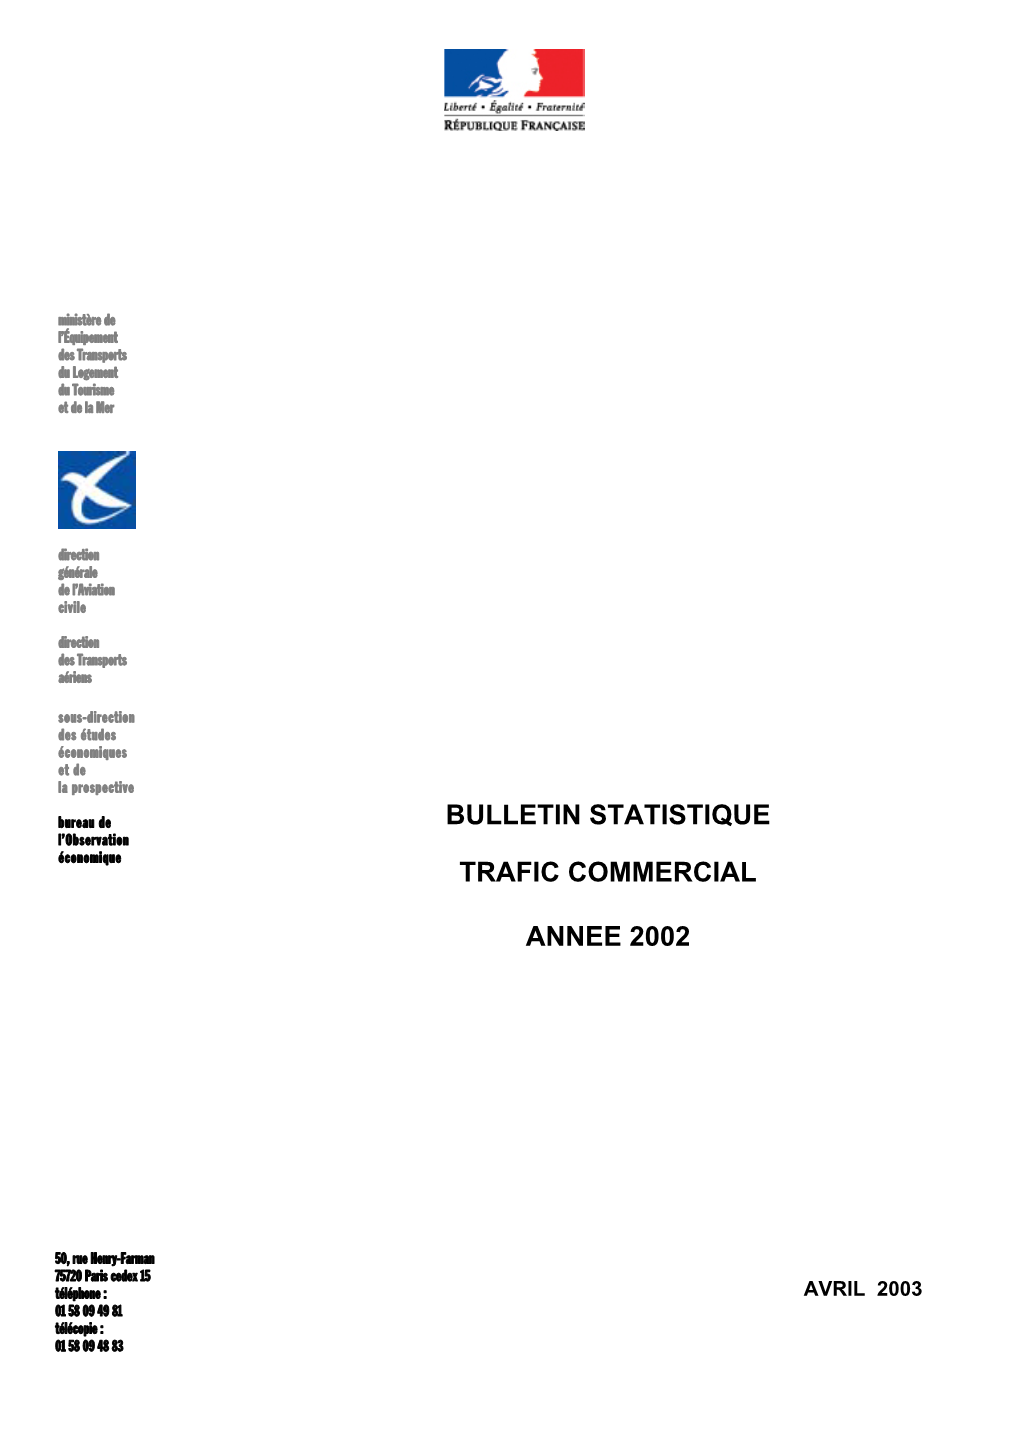 Bulletin Statistique Trafic Commercial Annee 2002